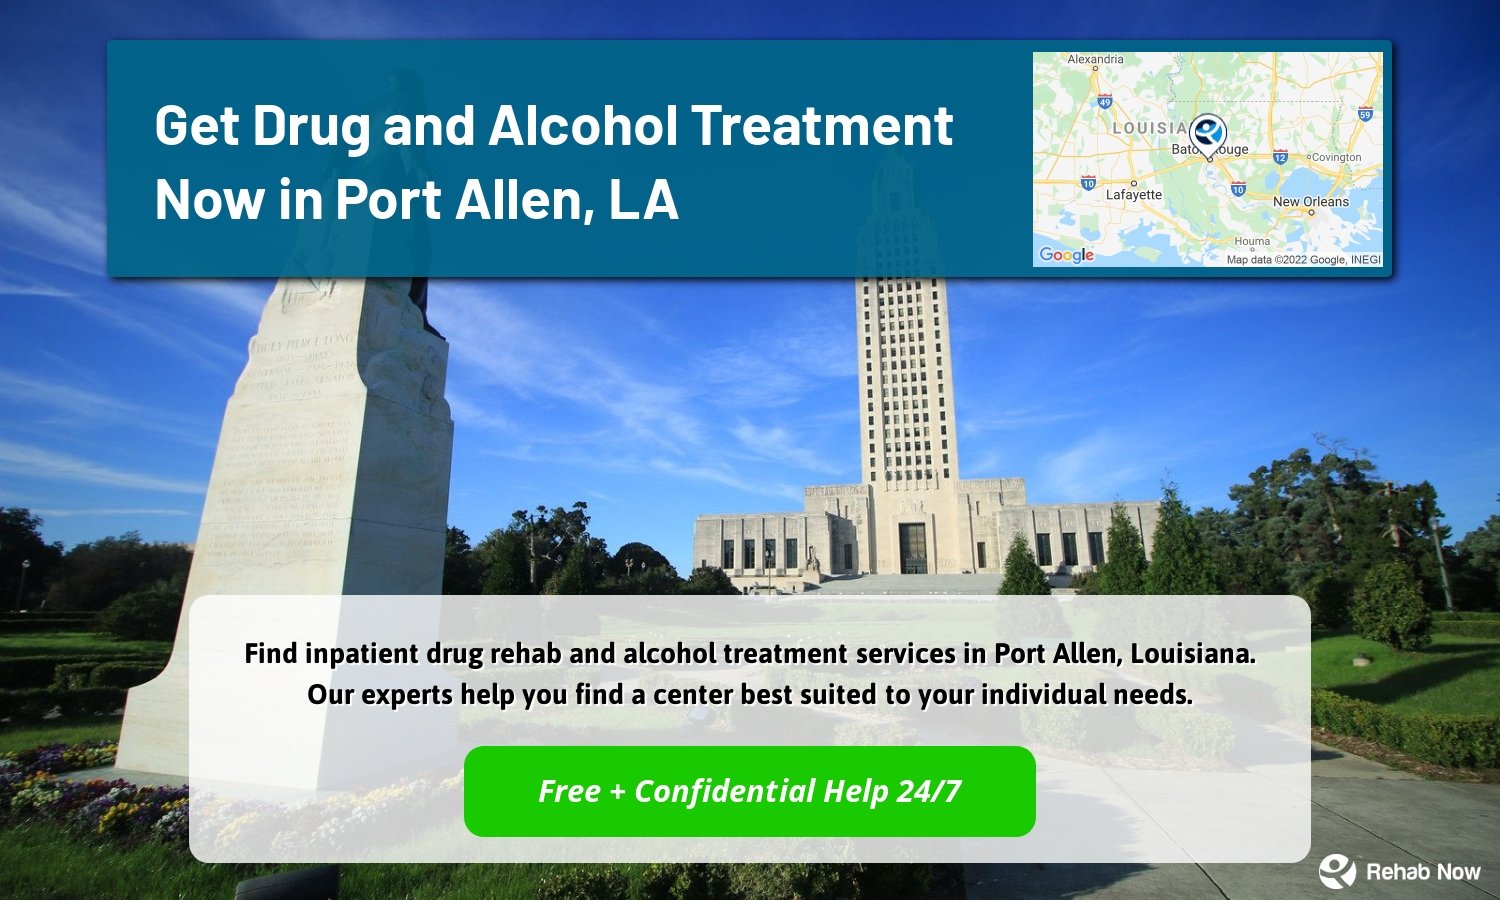 Find inpatient drug rehab and alcohol treatment services in Port Allen, Louisiana. Our experts help you find a center best suited to your individual needs.